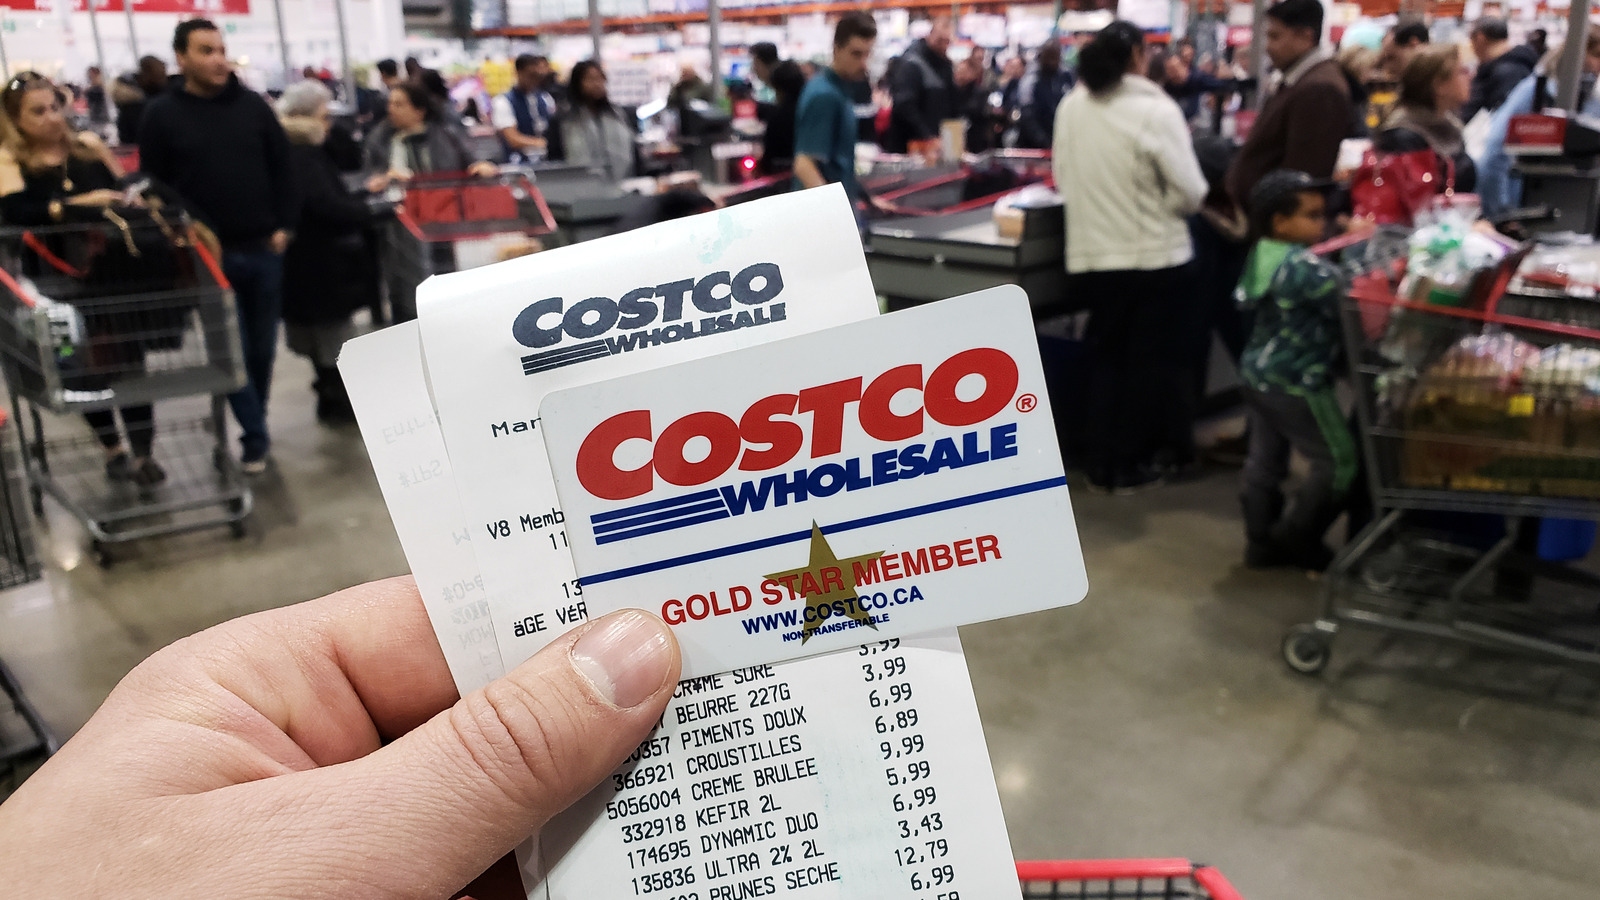 The First Ever Costco Has Opened In New Zealand And It's Chaos